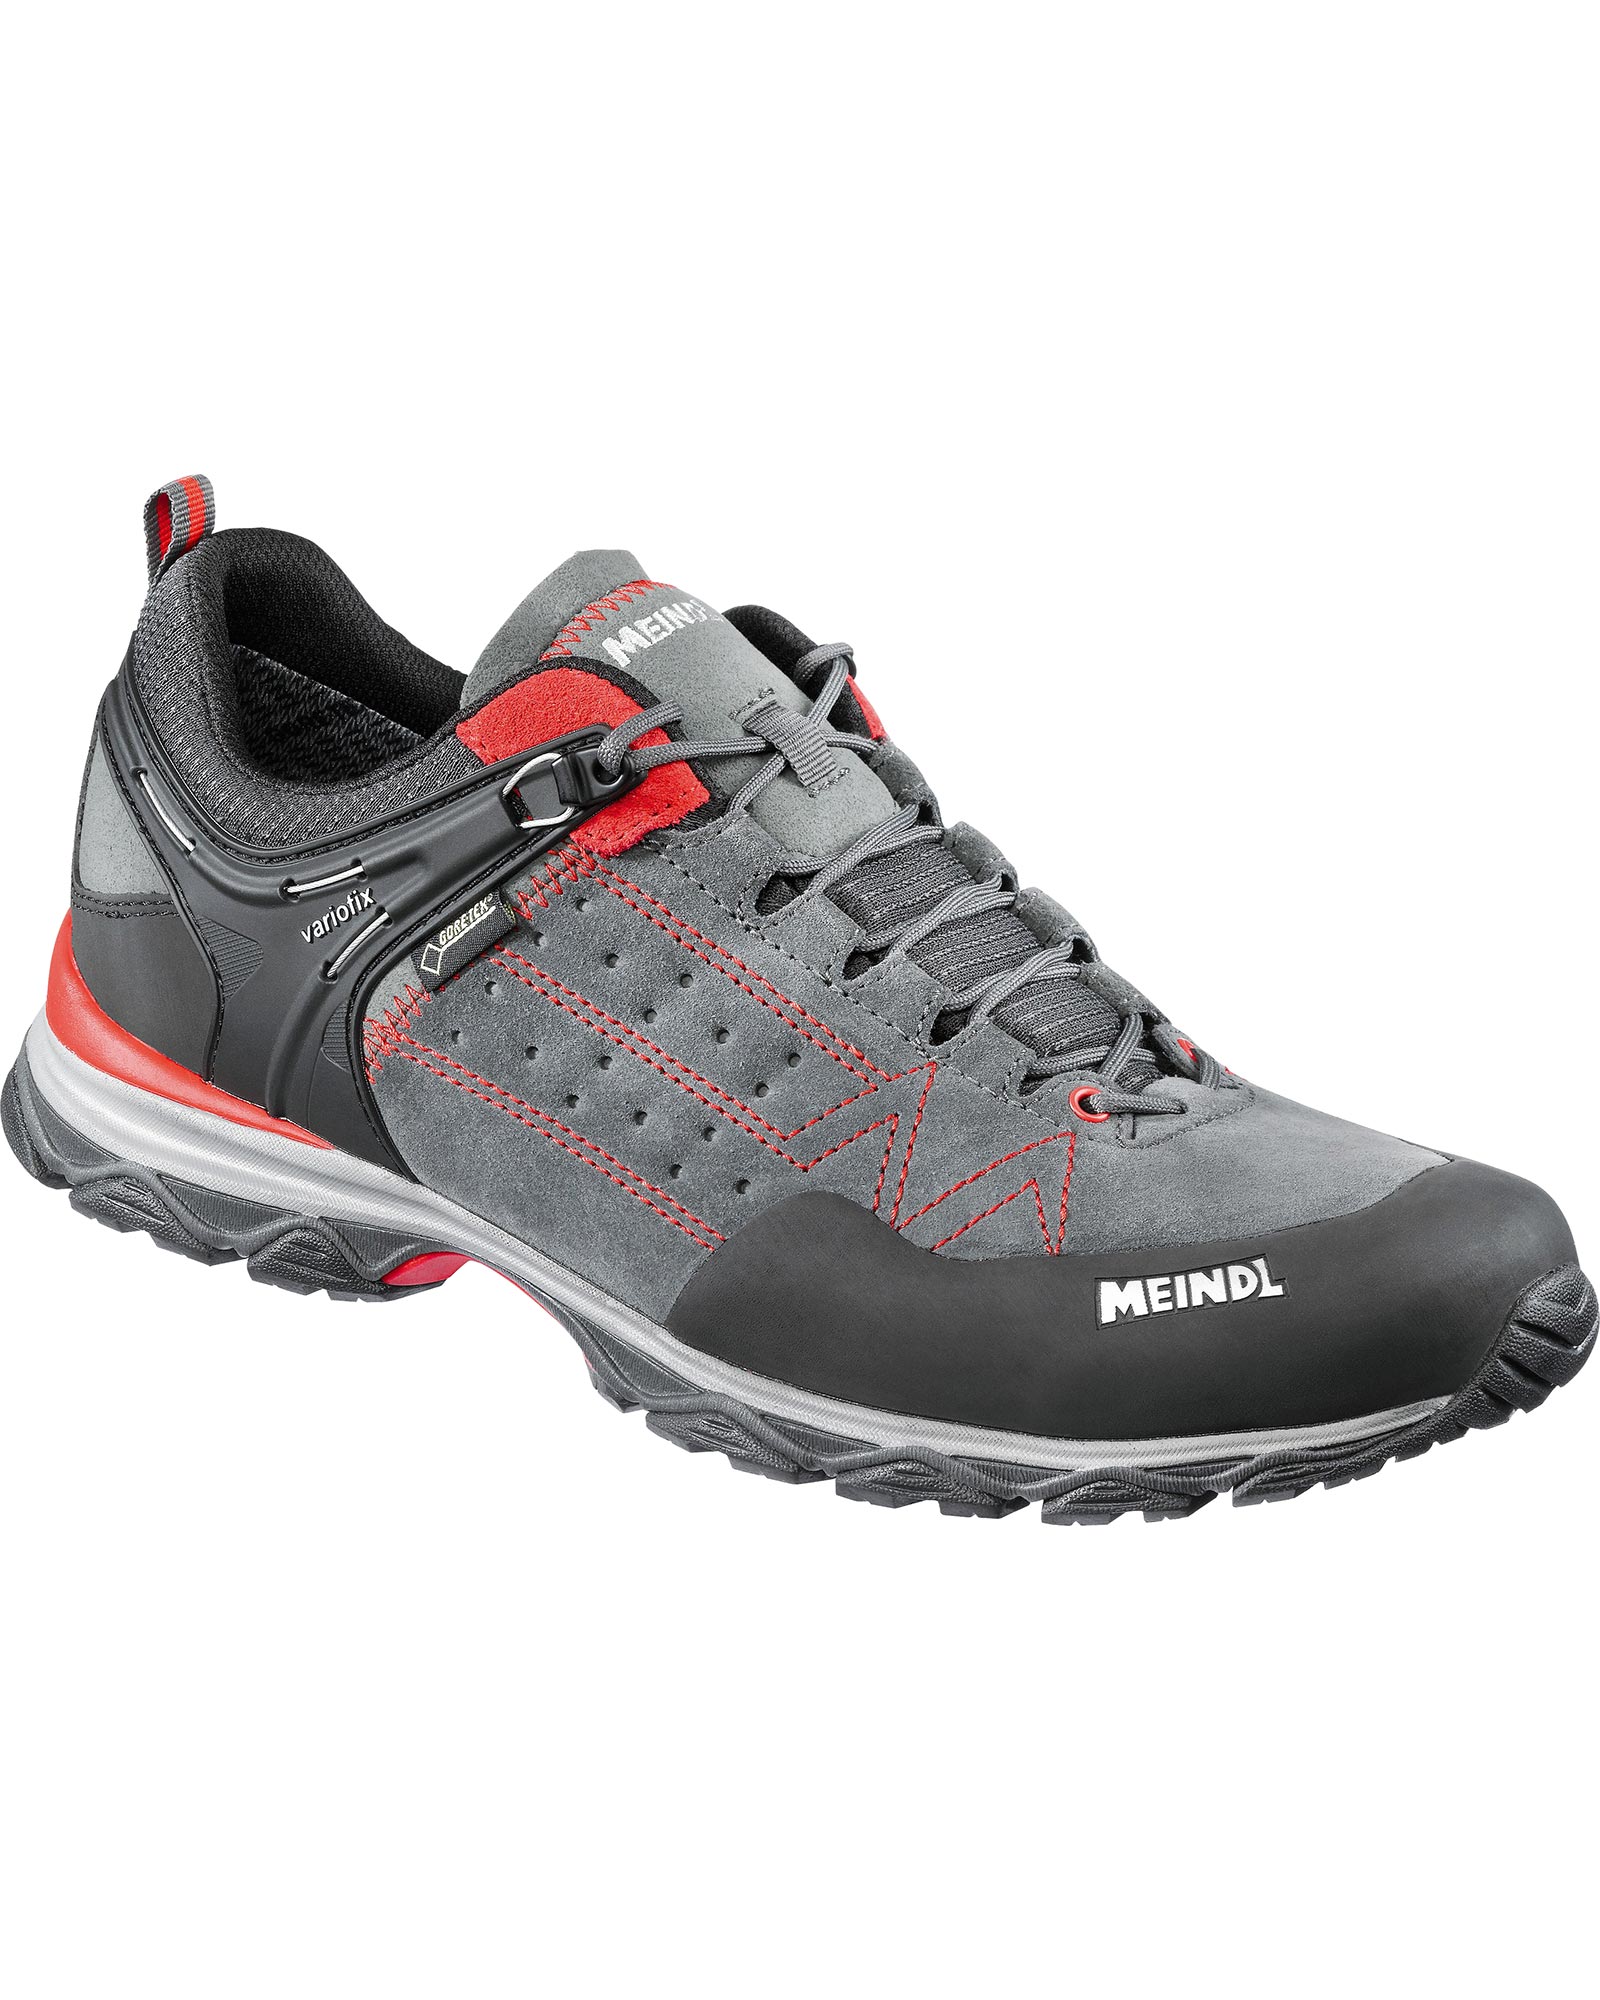 Meindl Ontario GORE TEX Men’s Shoes - Red/Anthracite UK 8.5